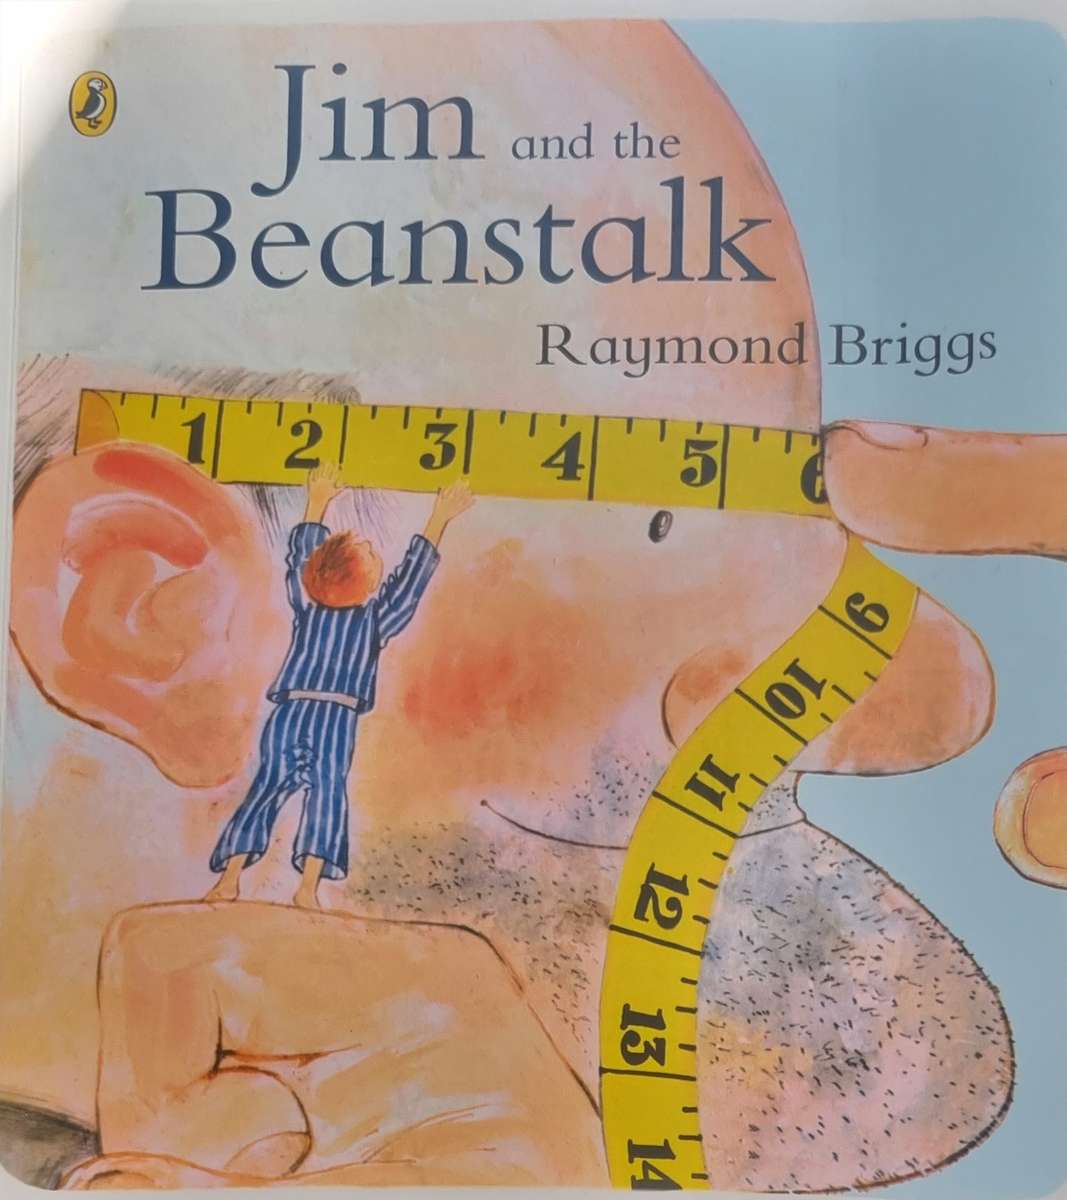 Jim and the Beanstalk puzzle online from photo